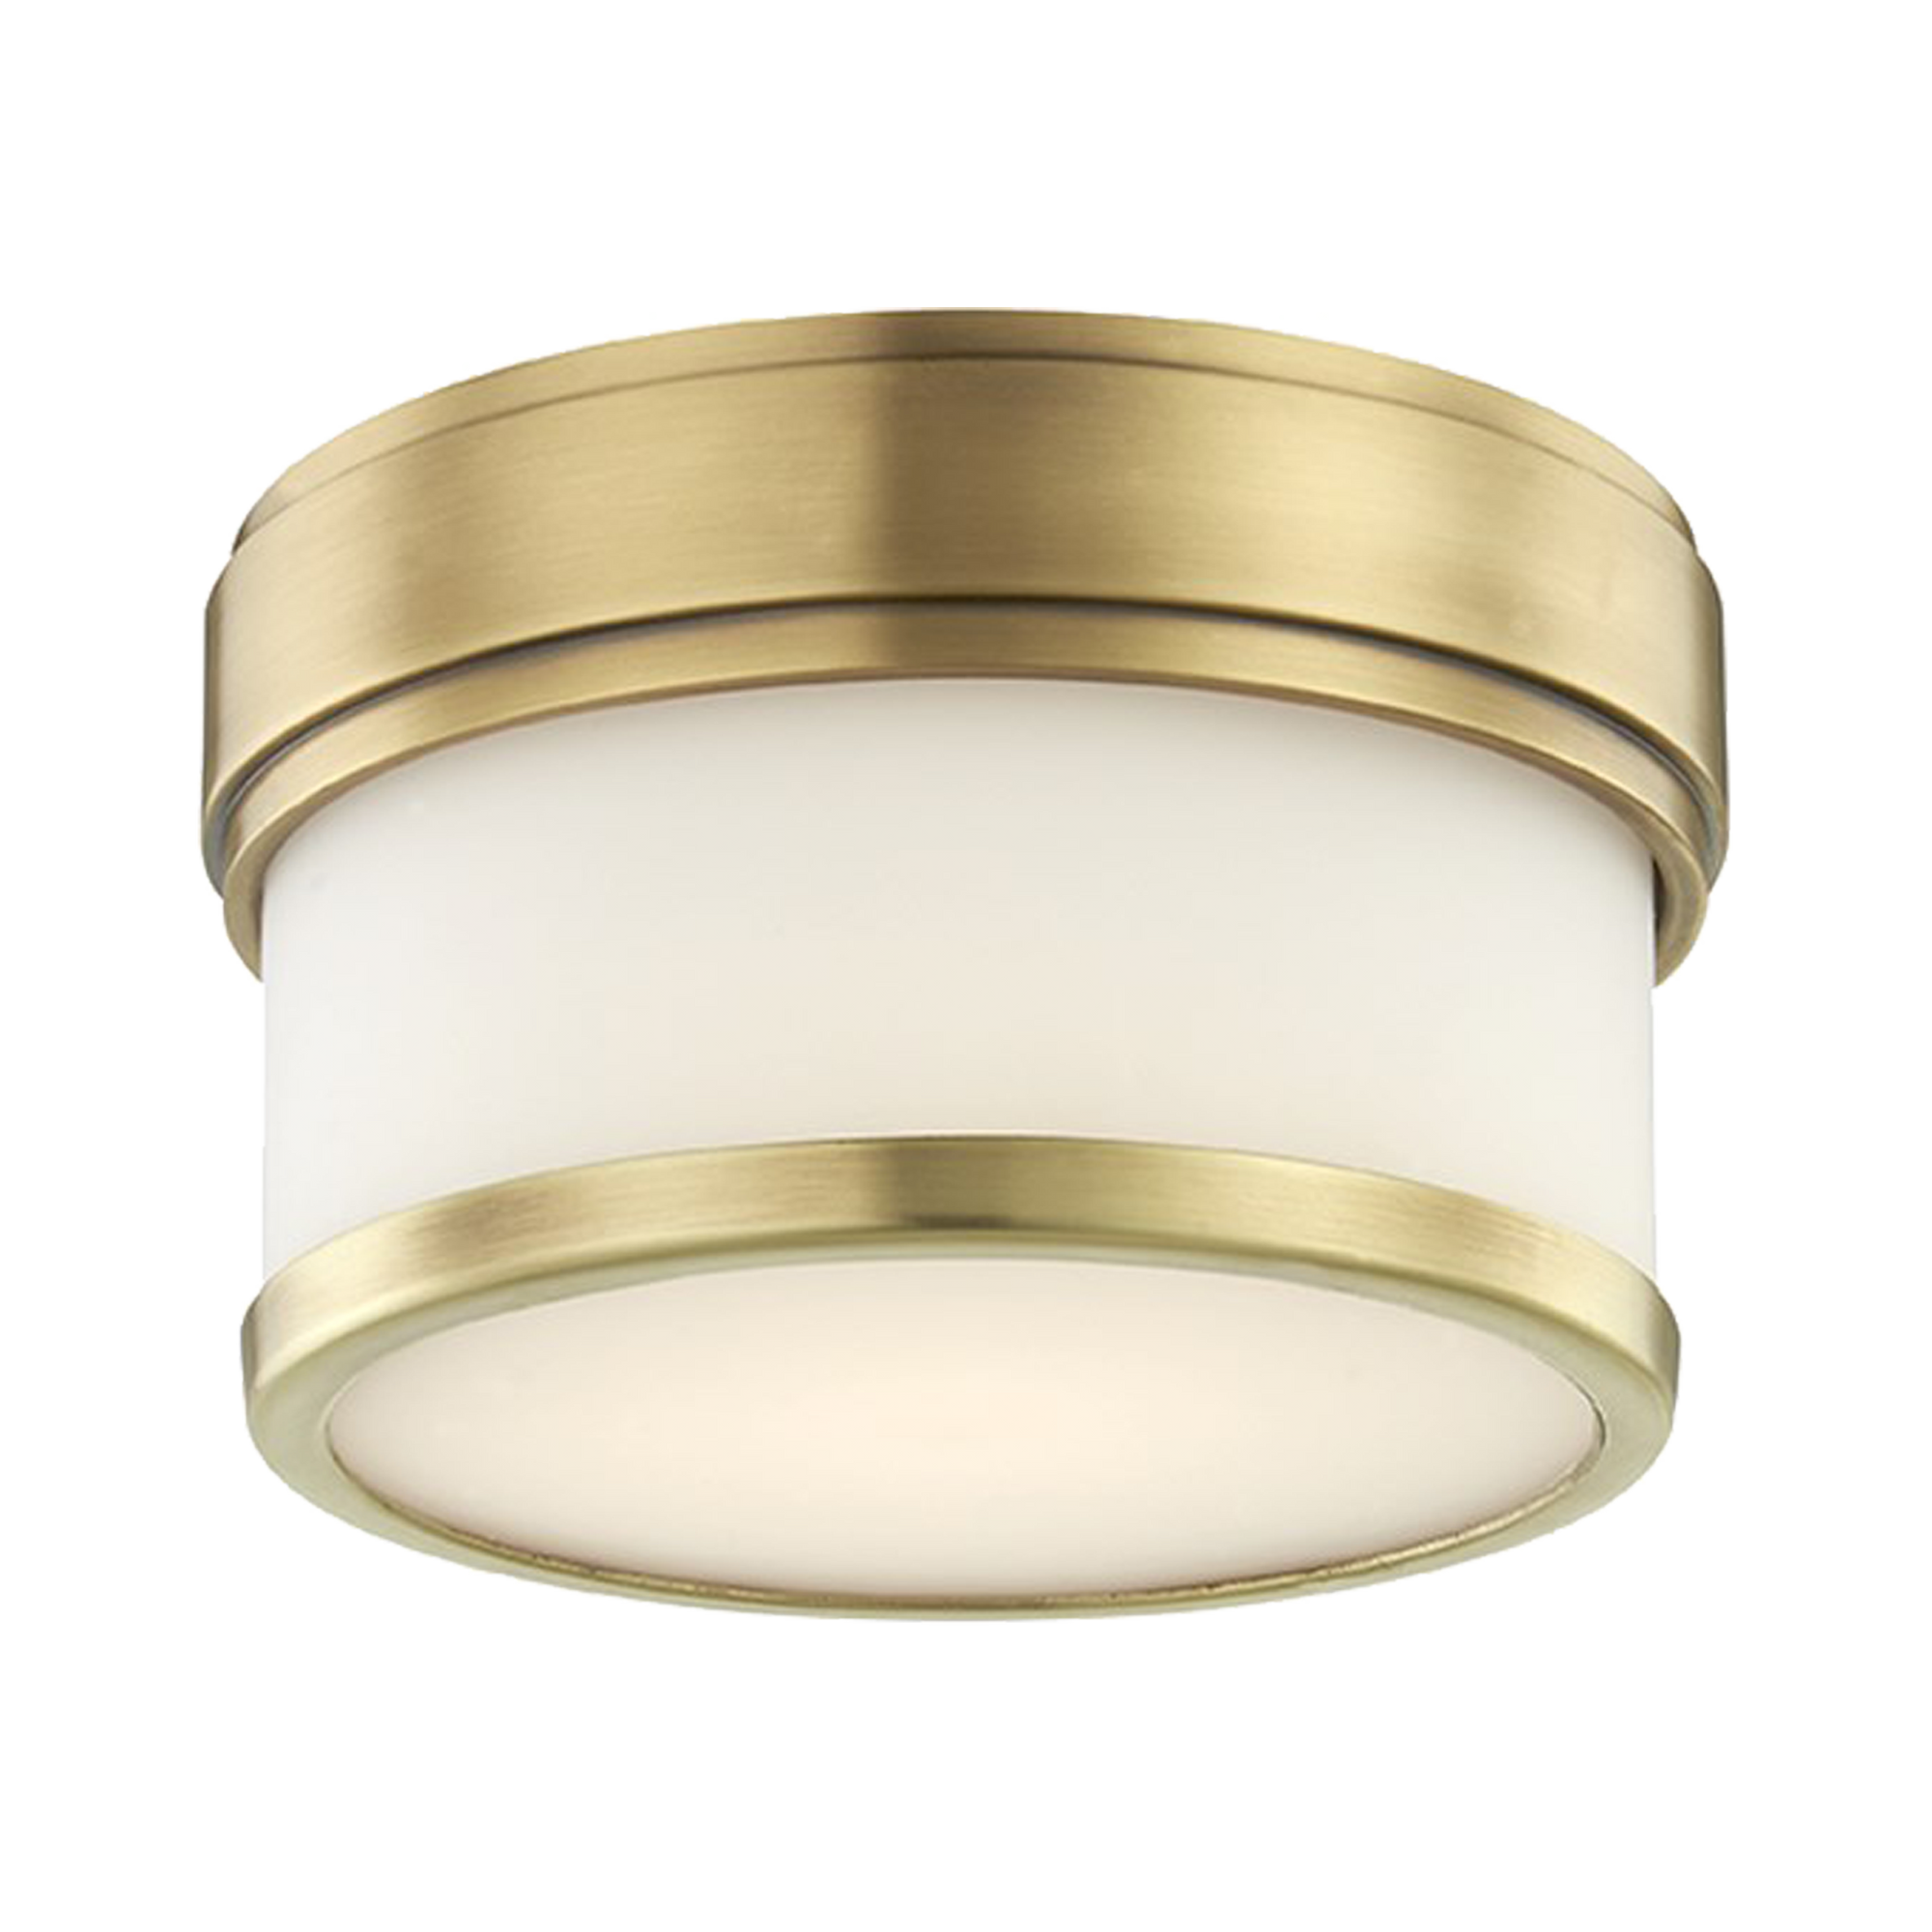 Thick bands along the canopy and the edge of the diffuser create a balanced sense of proportion in this LED flush mount.